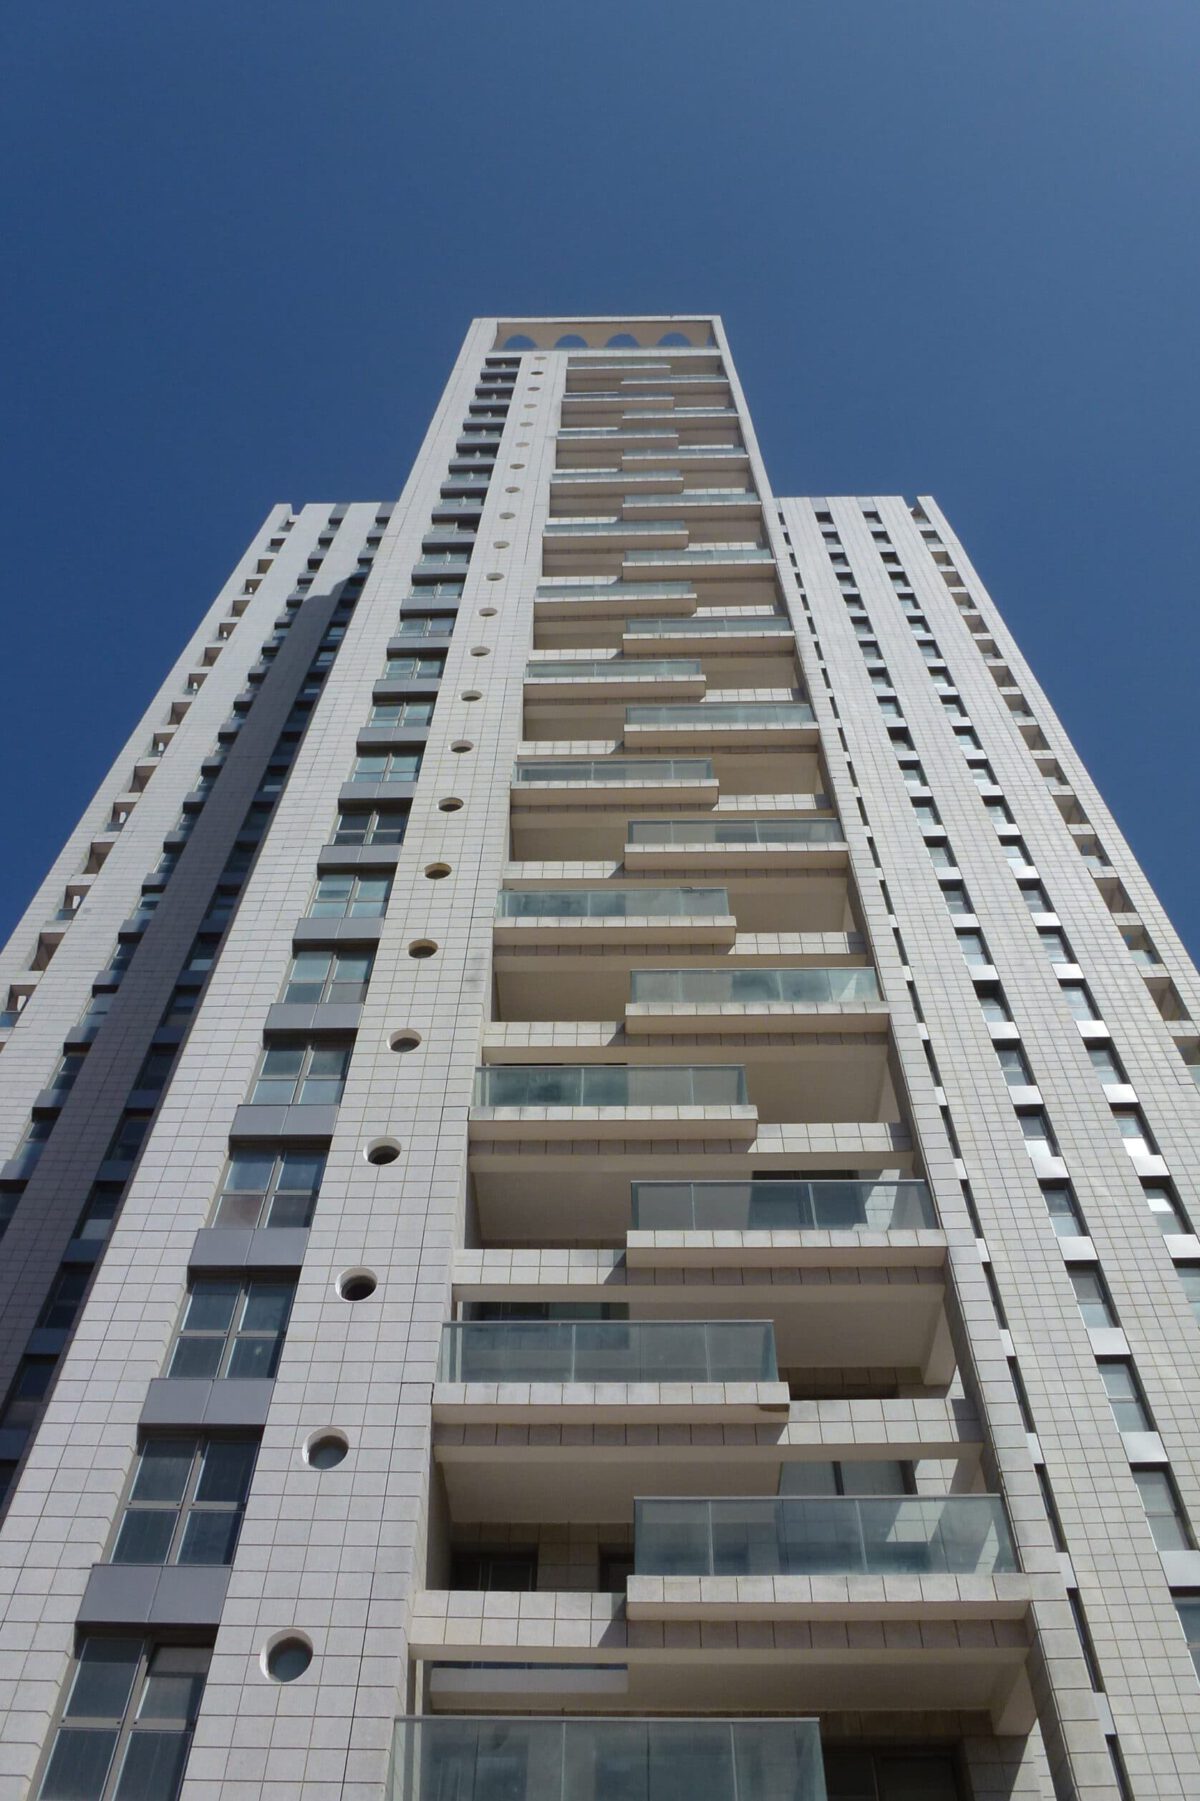 RESIDENTIAL TOWER GIVAT SHMUEL